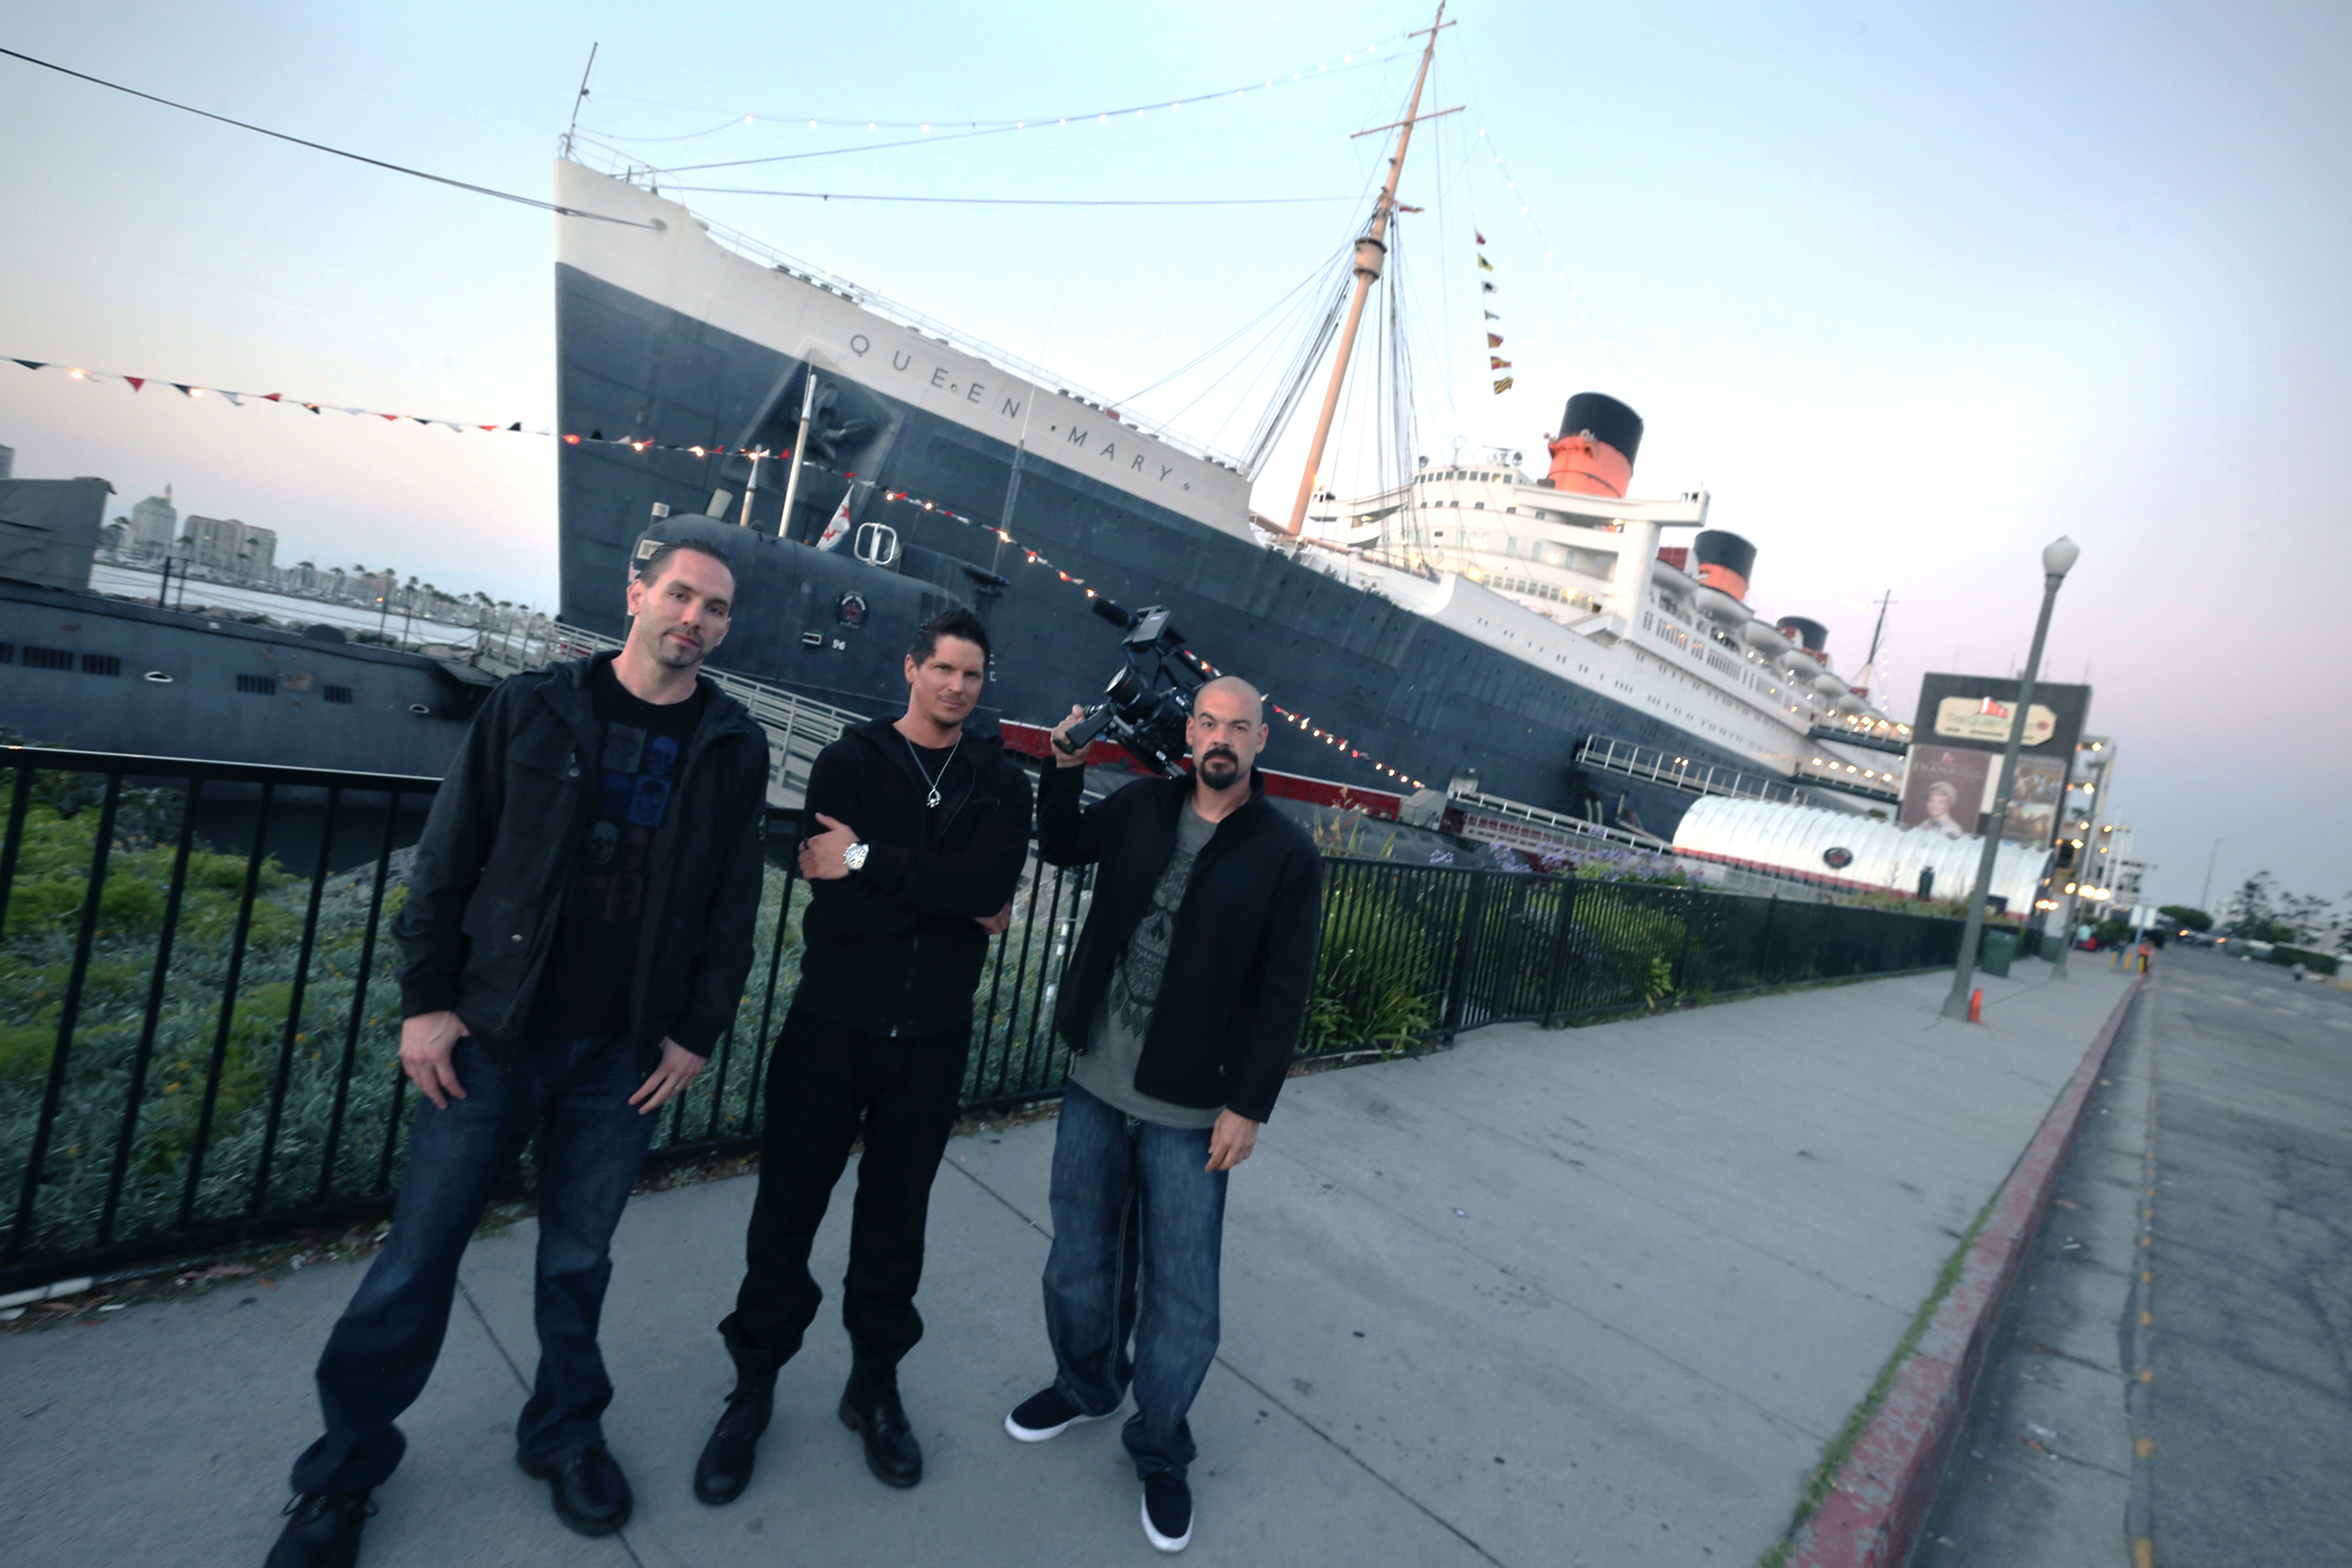 Ghost Adventures: Nick Groff, Zak Bagans and Aaron Goodwin outside RMS Queen Mary before lockdown